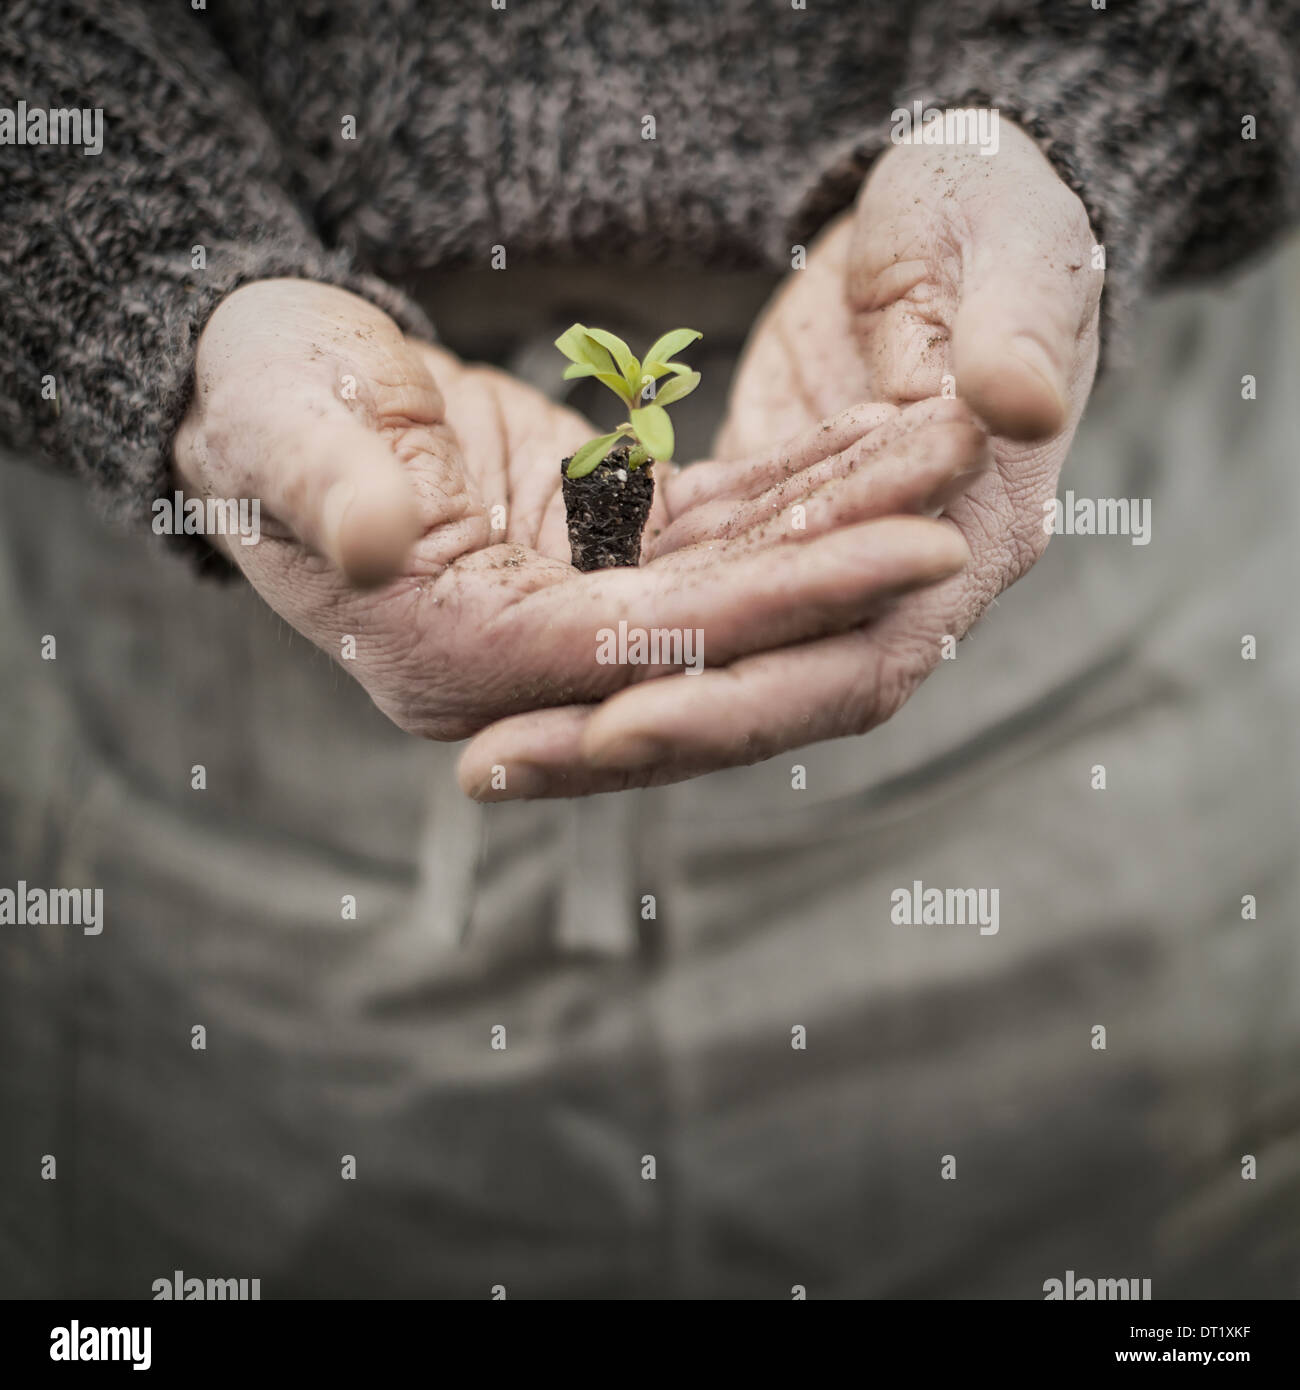 A person in a commercial glasshouse holding a small plant seedling in his cupped hands Stock Photo